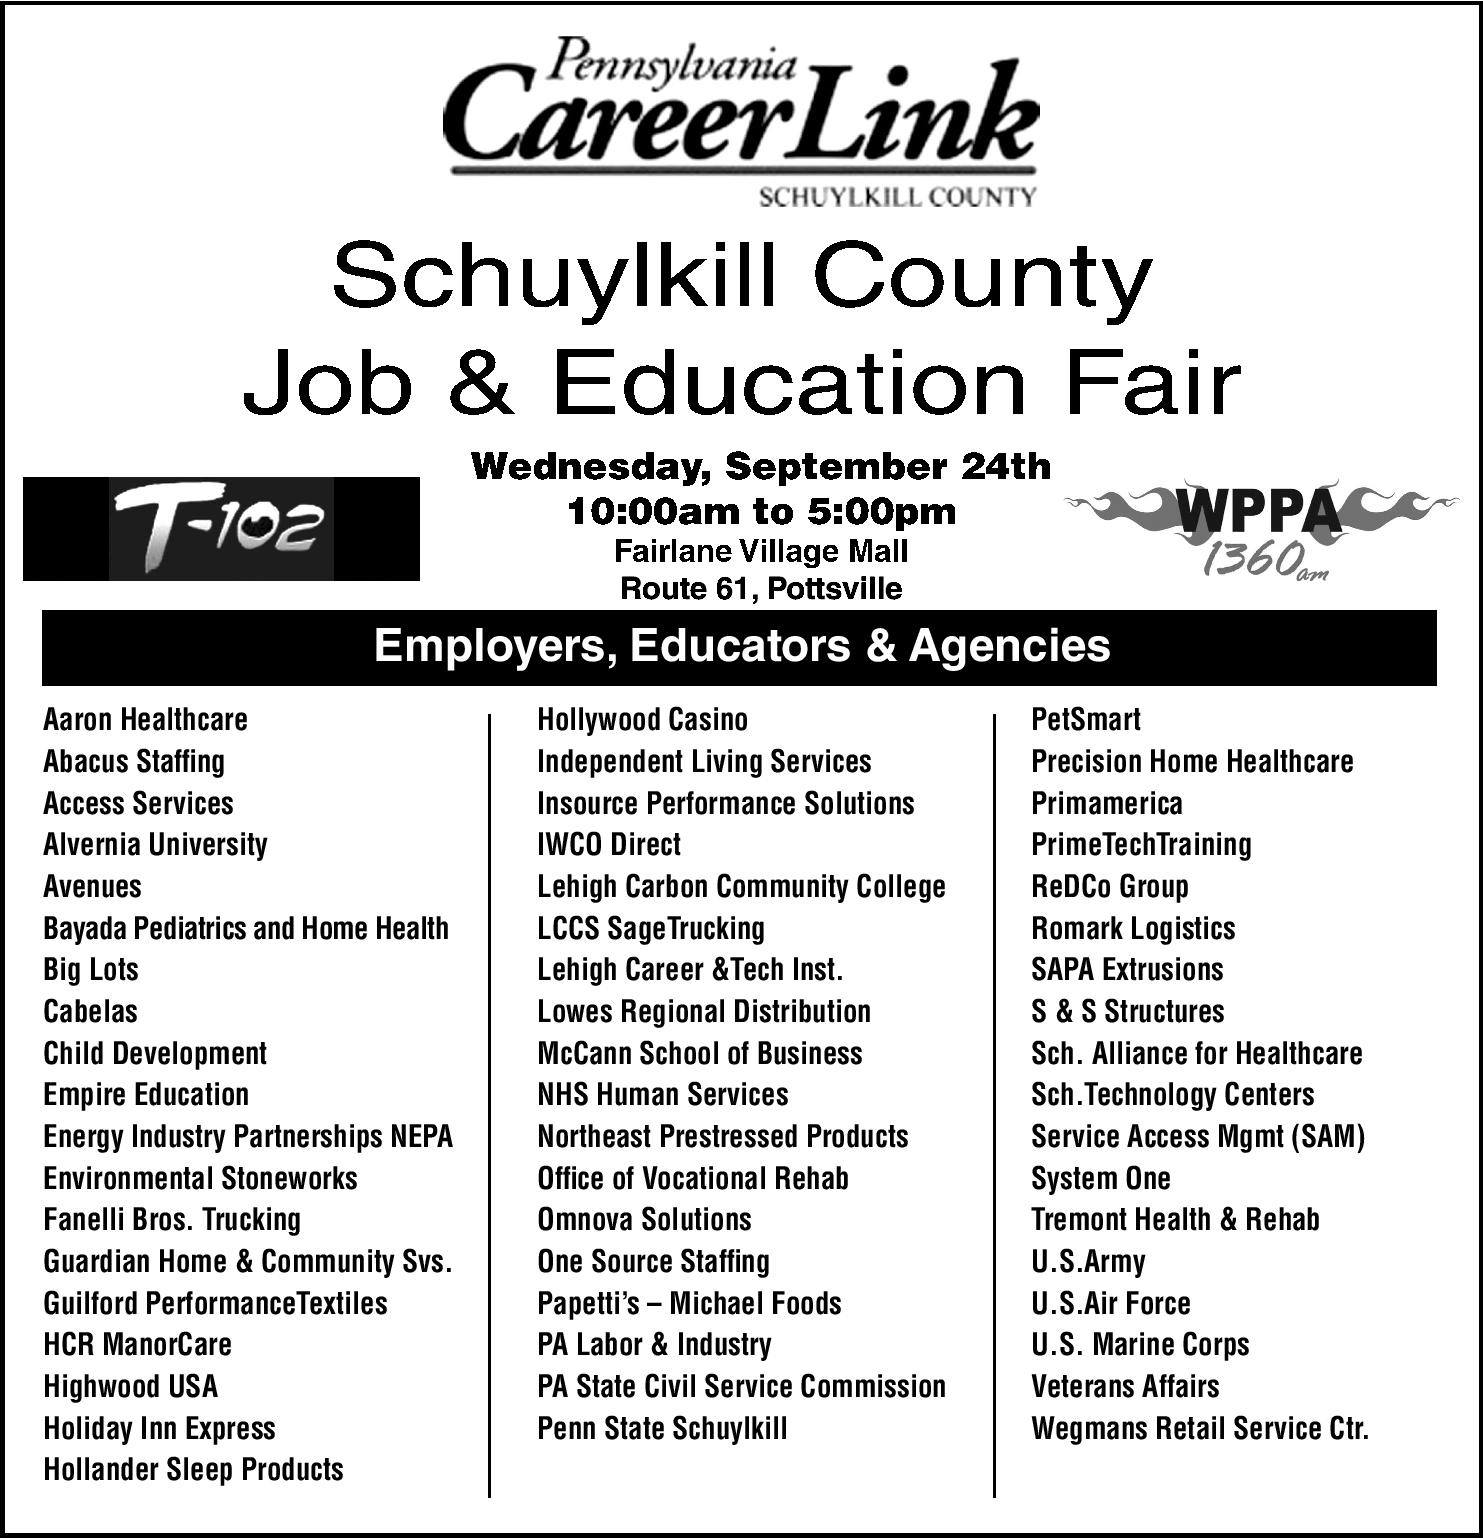 JOB AND EDUCATION FAIR WEDNESDAY AT FAIRLANE VILLAGE MALL IN ...